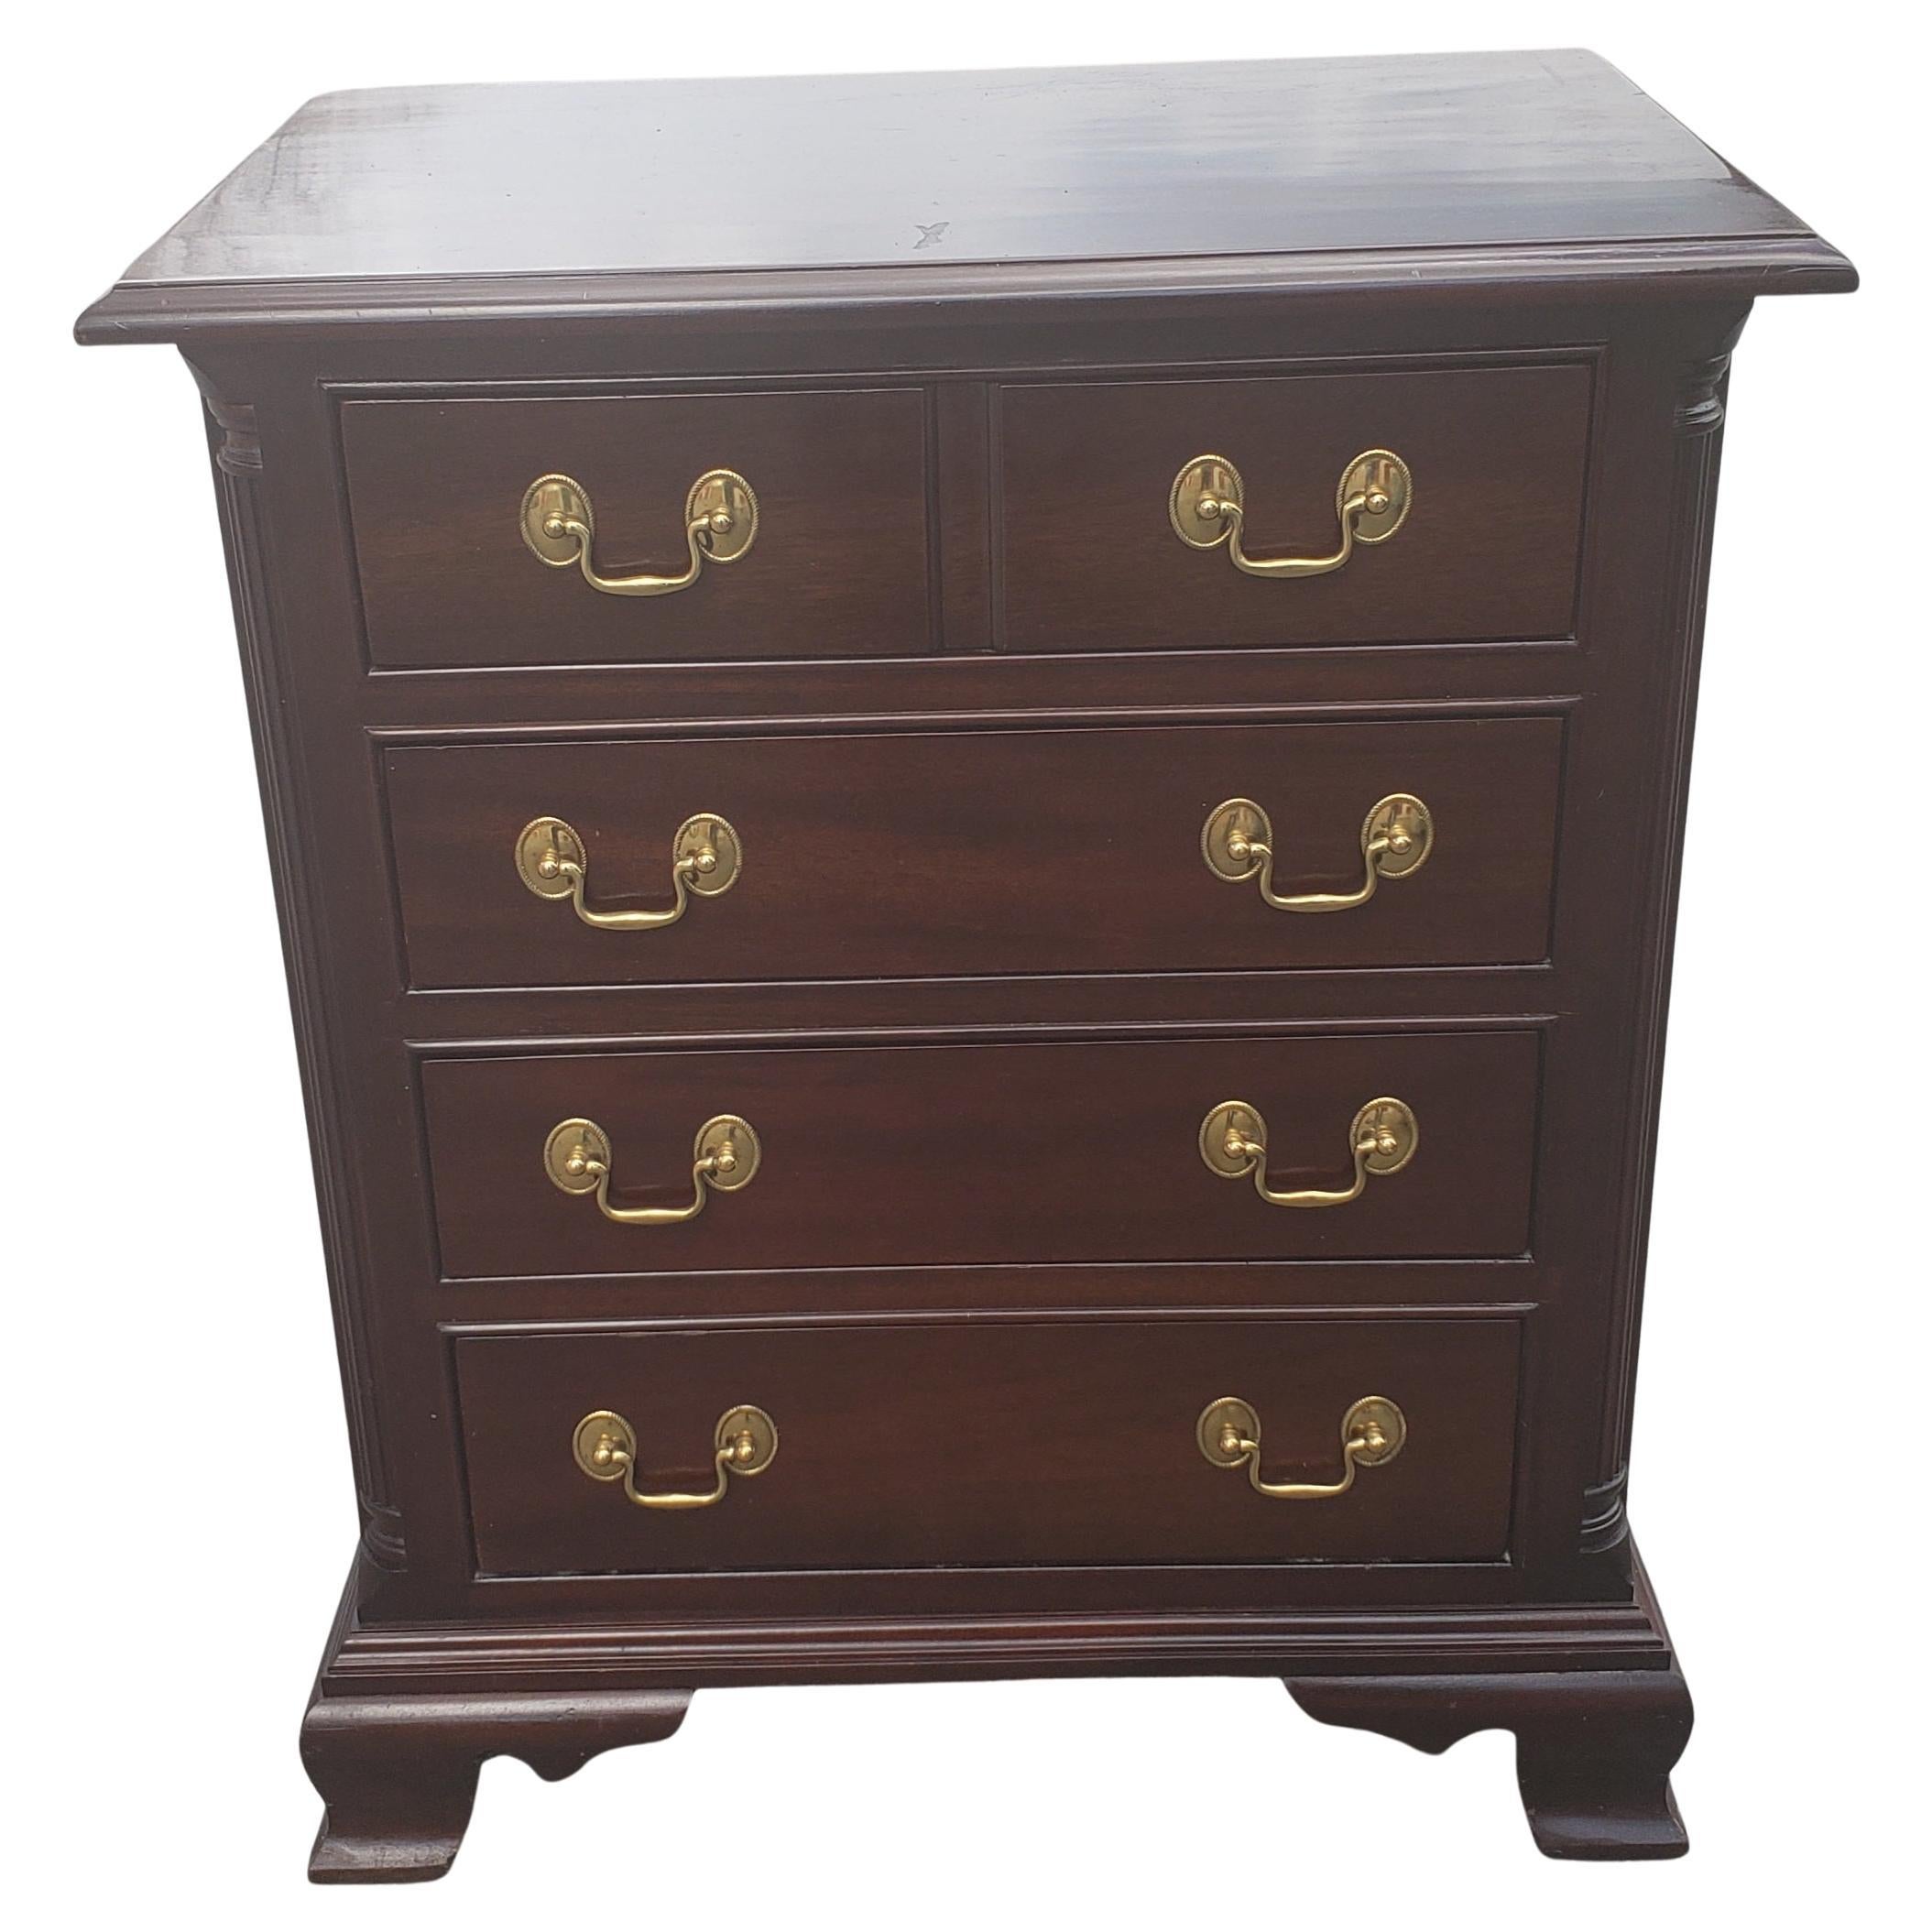 20th Century Stickley Chippendale Solid Cherry 4 Drawer Bedside Chest, circa 1980s